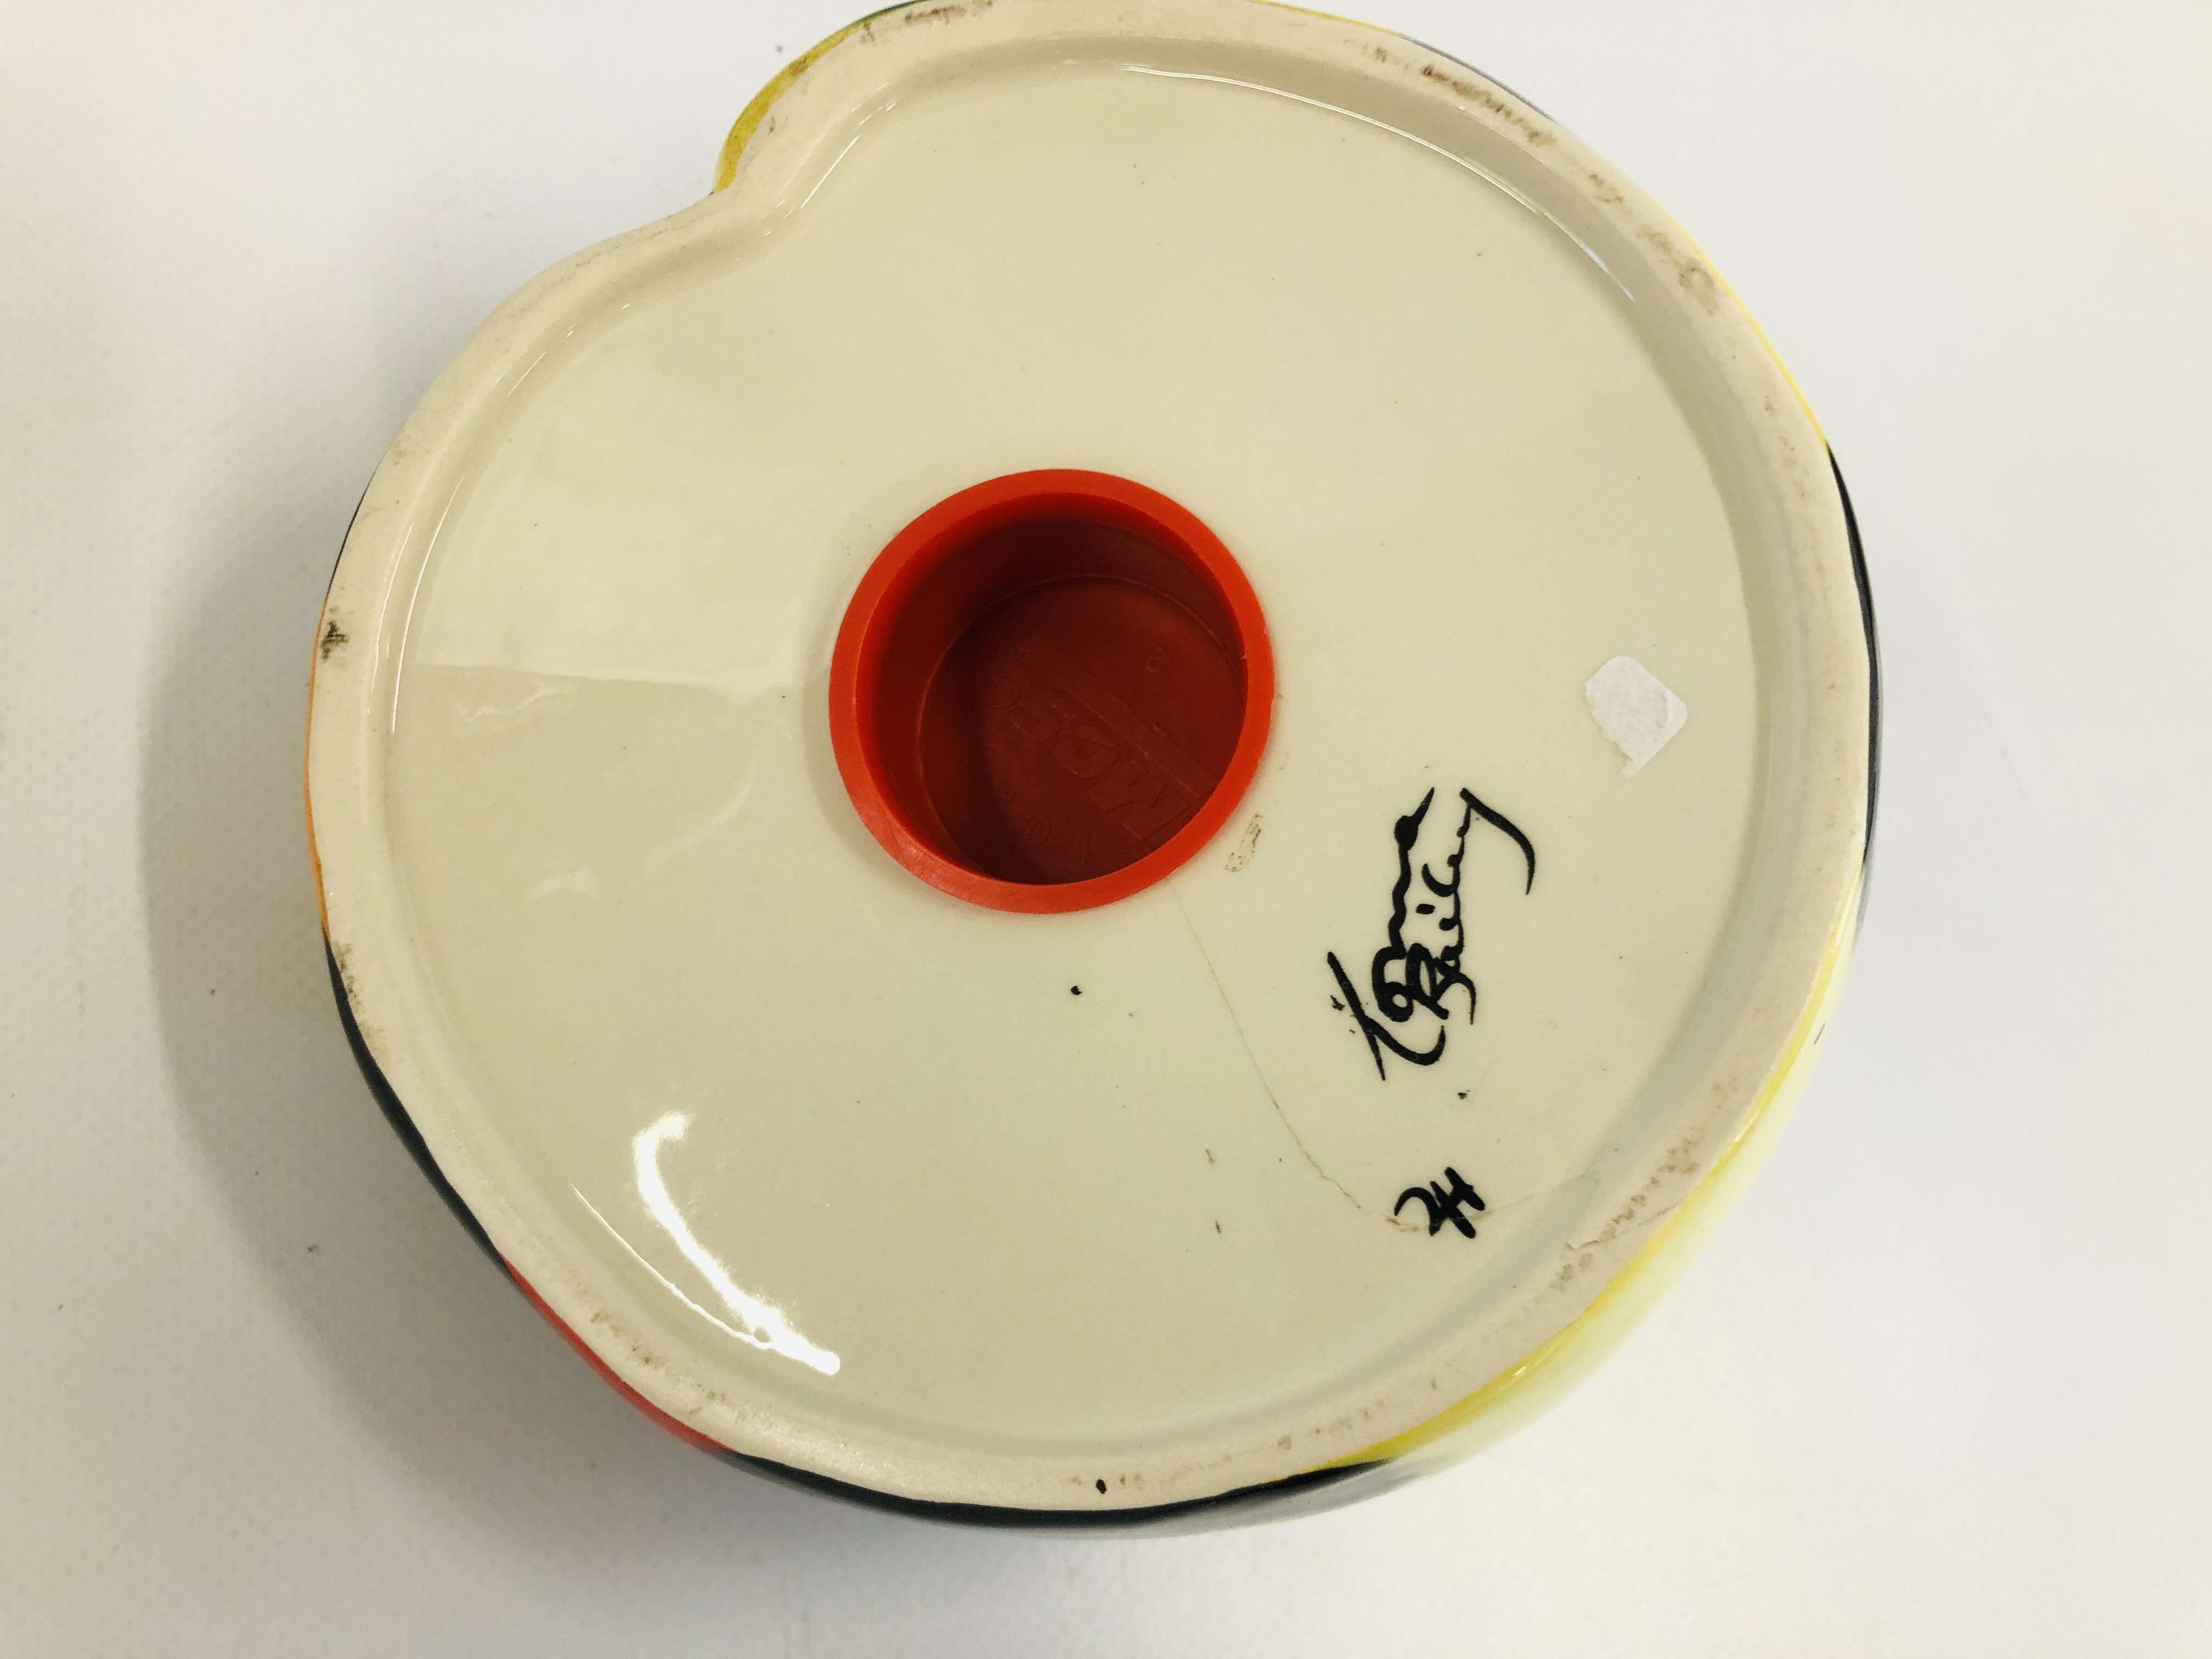 POTTERY "ANGRY ROOK" SIGNED LORNA BAILEY H 18CM. - Image 5 of 8